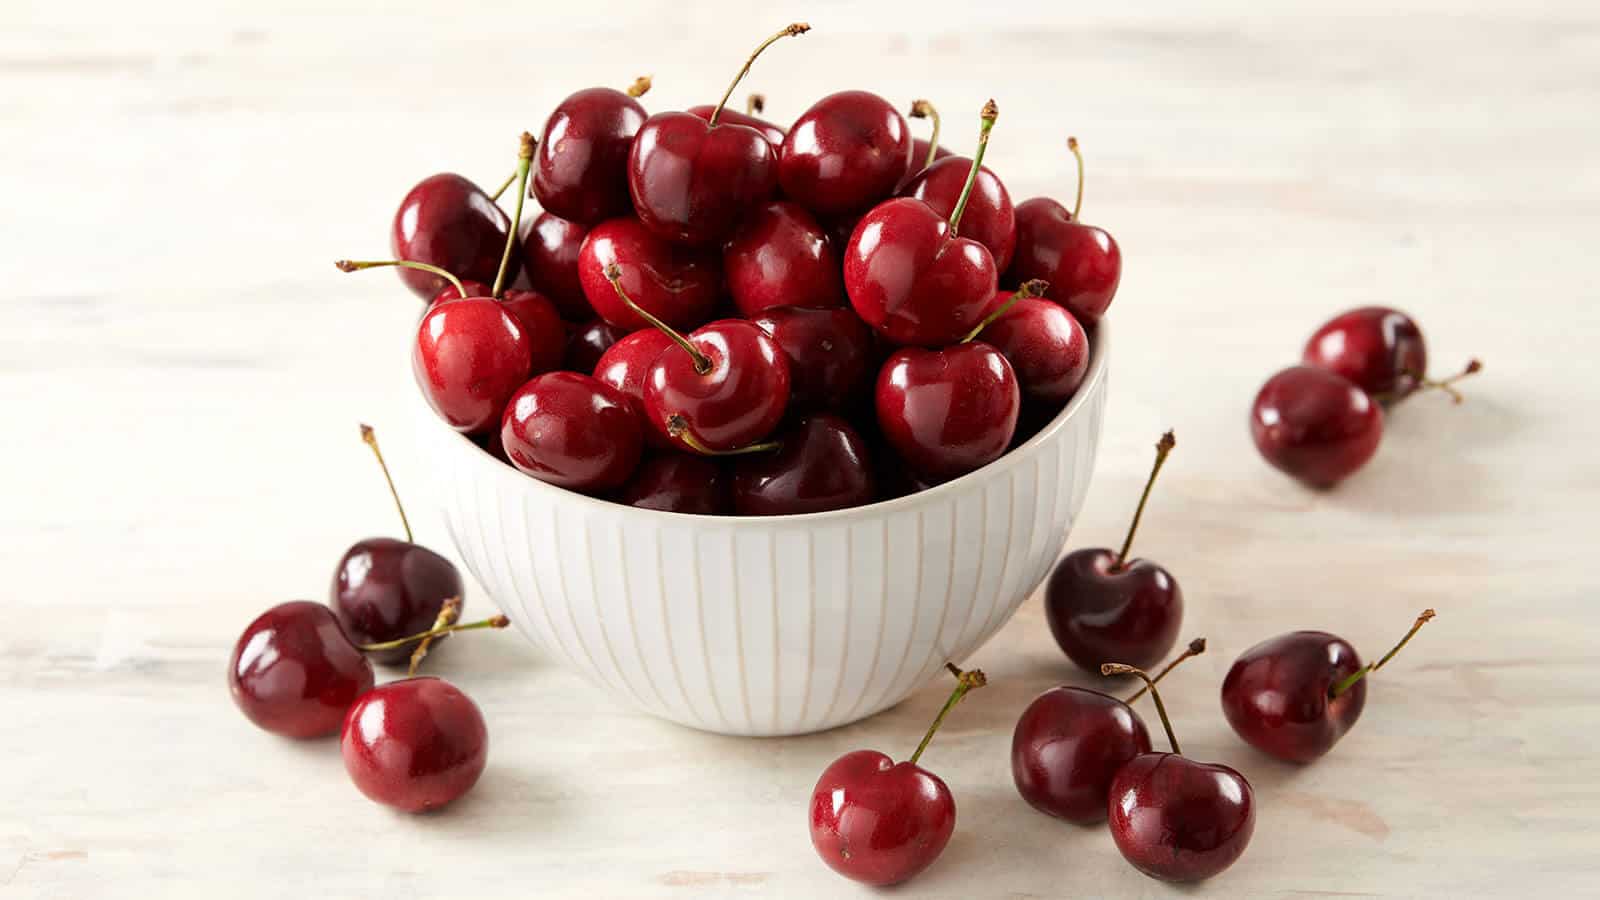 Why are cherries so expensive?